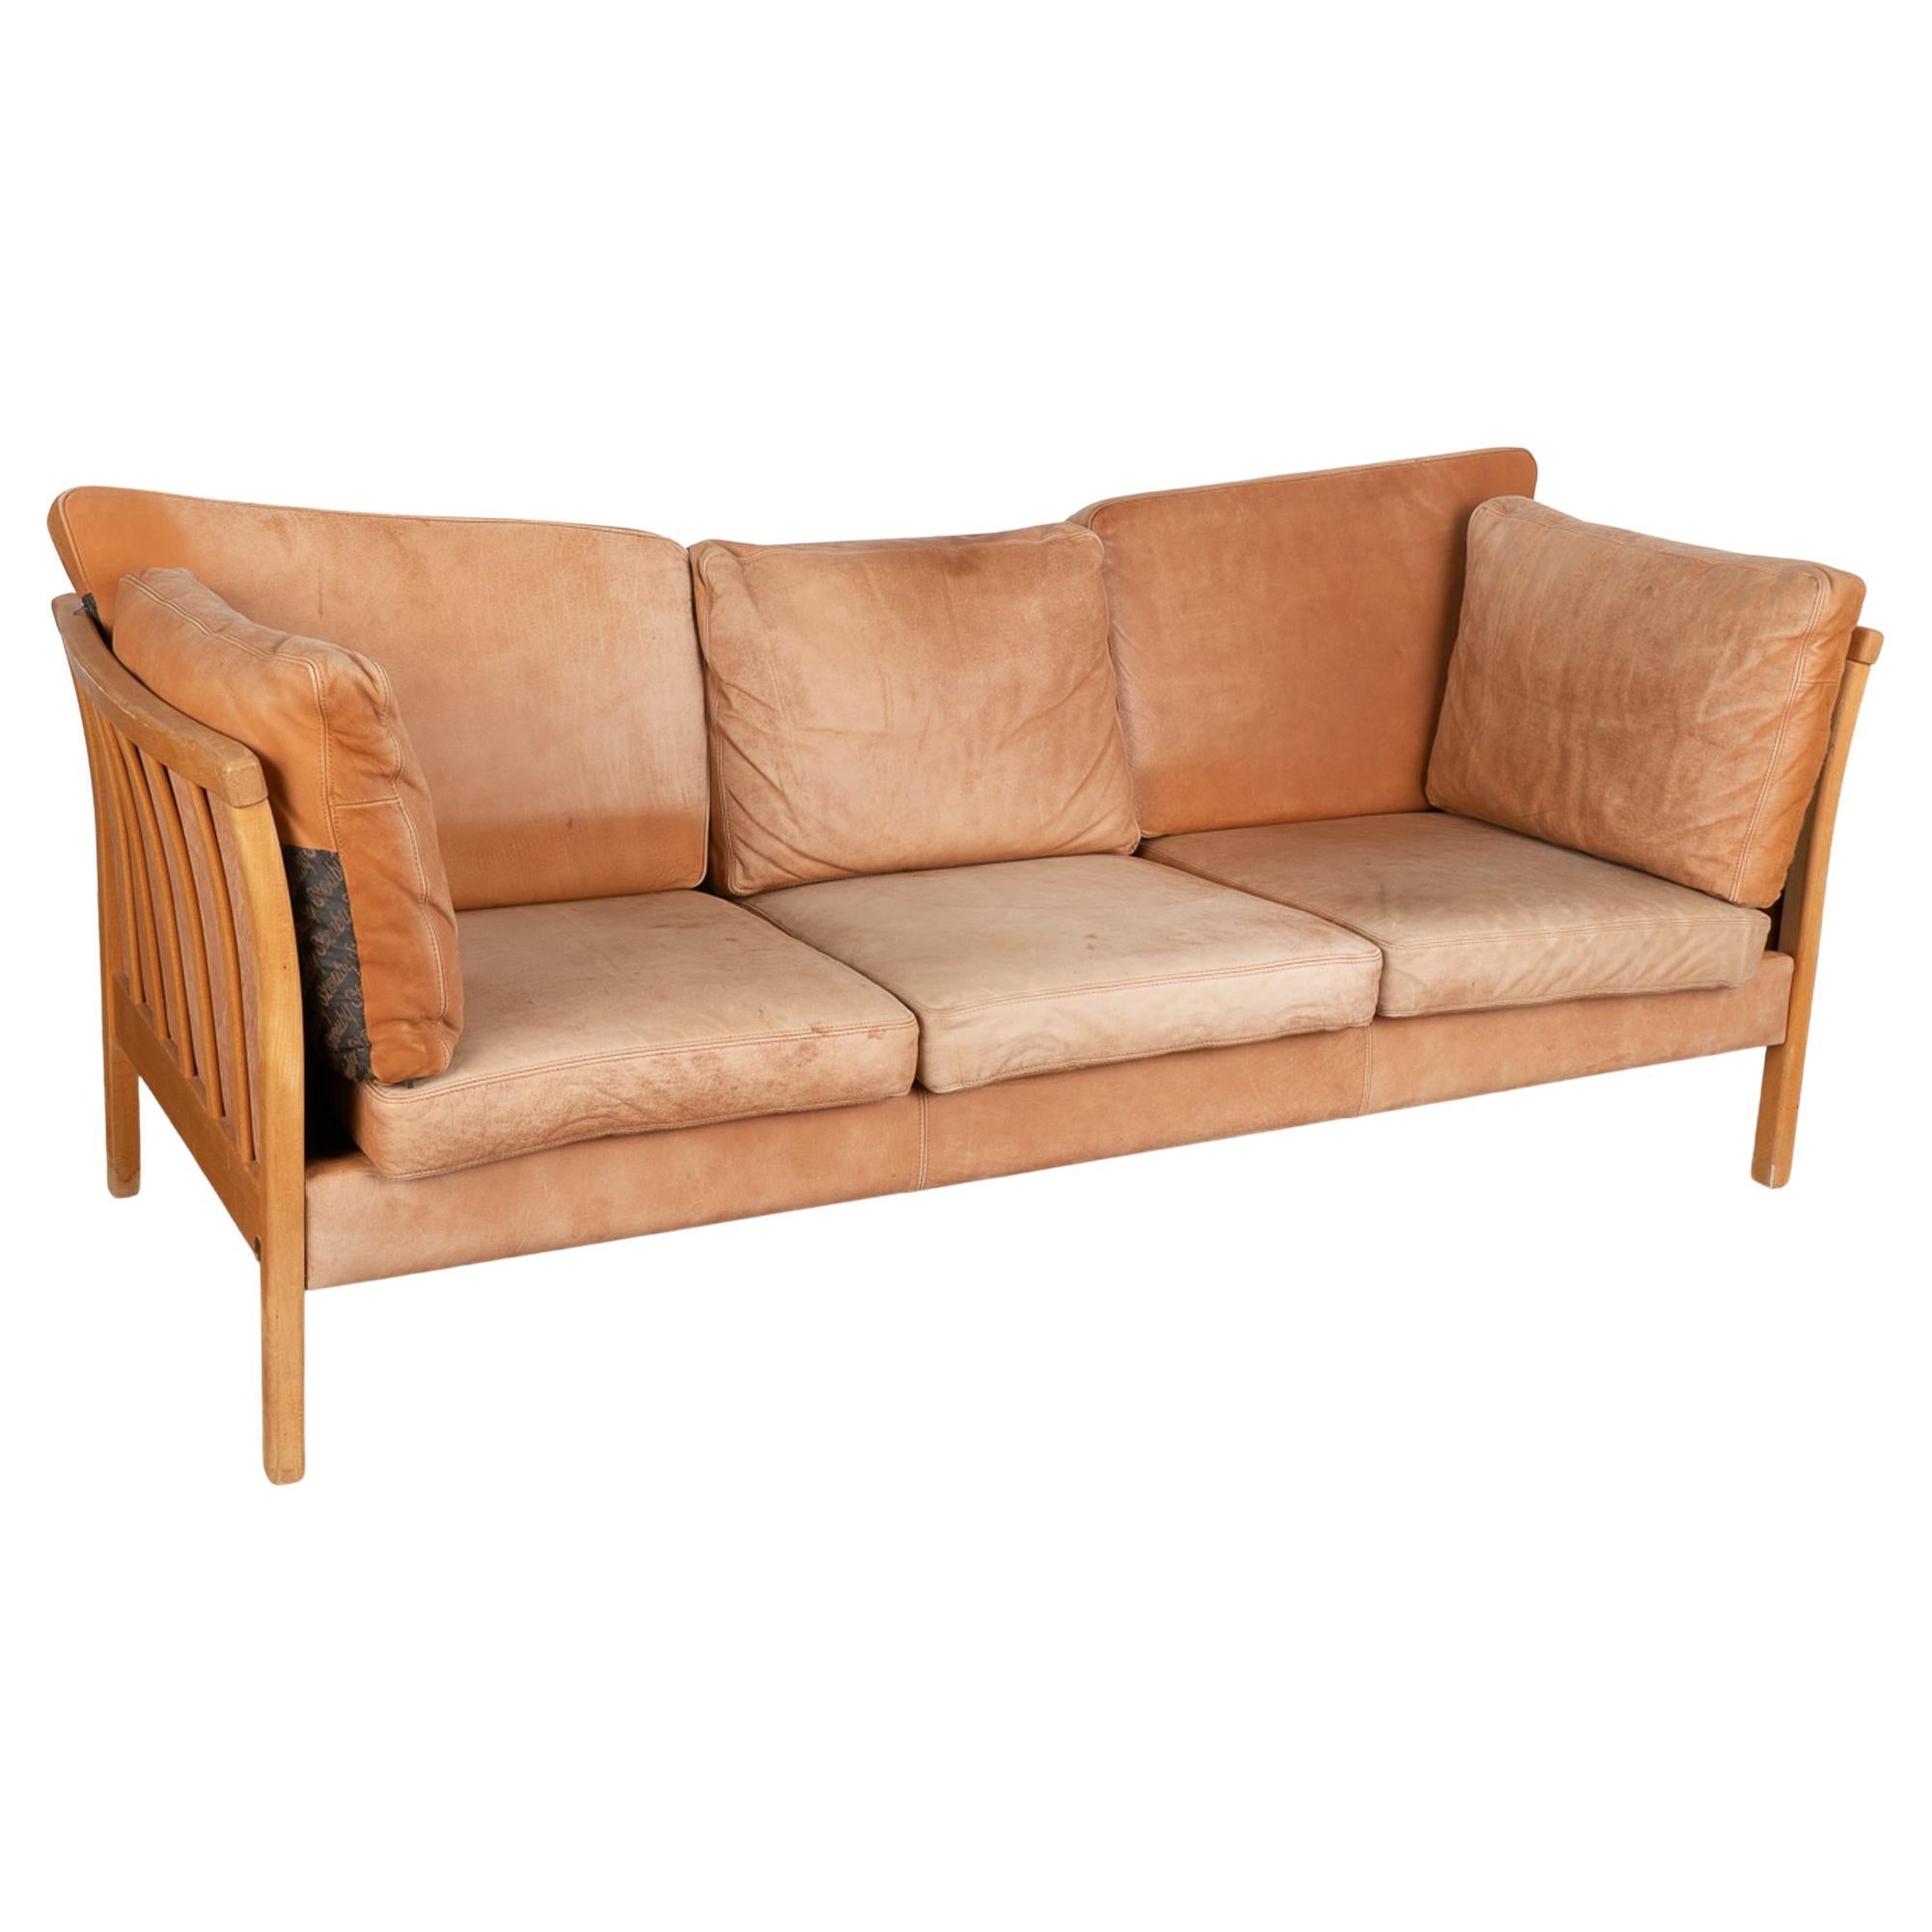 Mid-Century Modern 3 Seat Vintage Leather Sofa by Stouby of Denmark, circa 1970